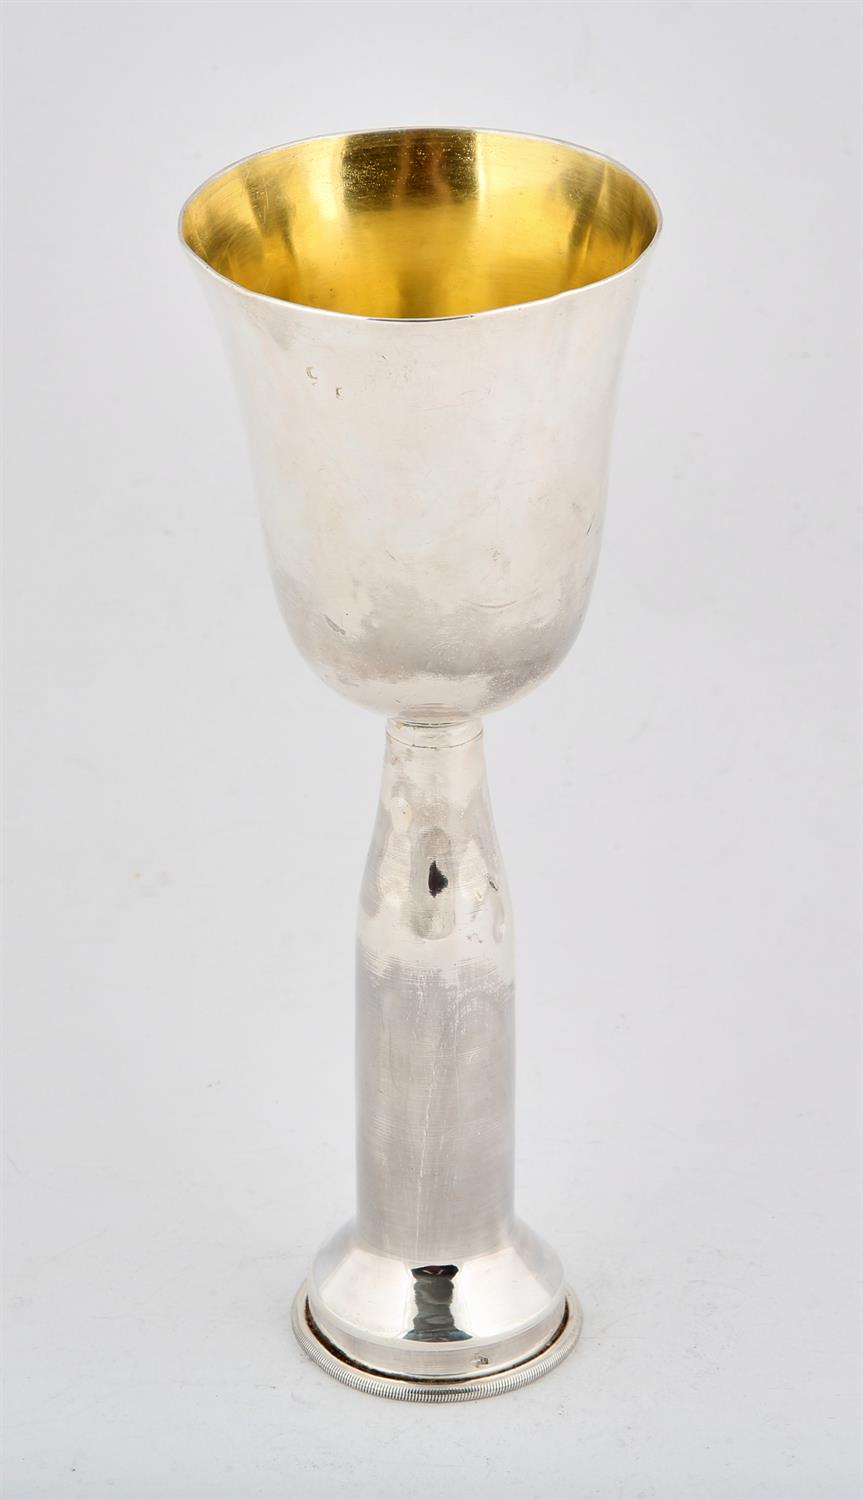 Continental goblet stamped 925, 5.7 ozs SILVER COLLECTION OF SIR RAY TINDLE CBE DL 1926-2022 The